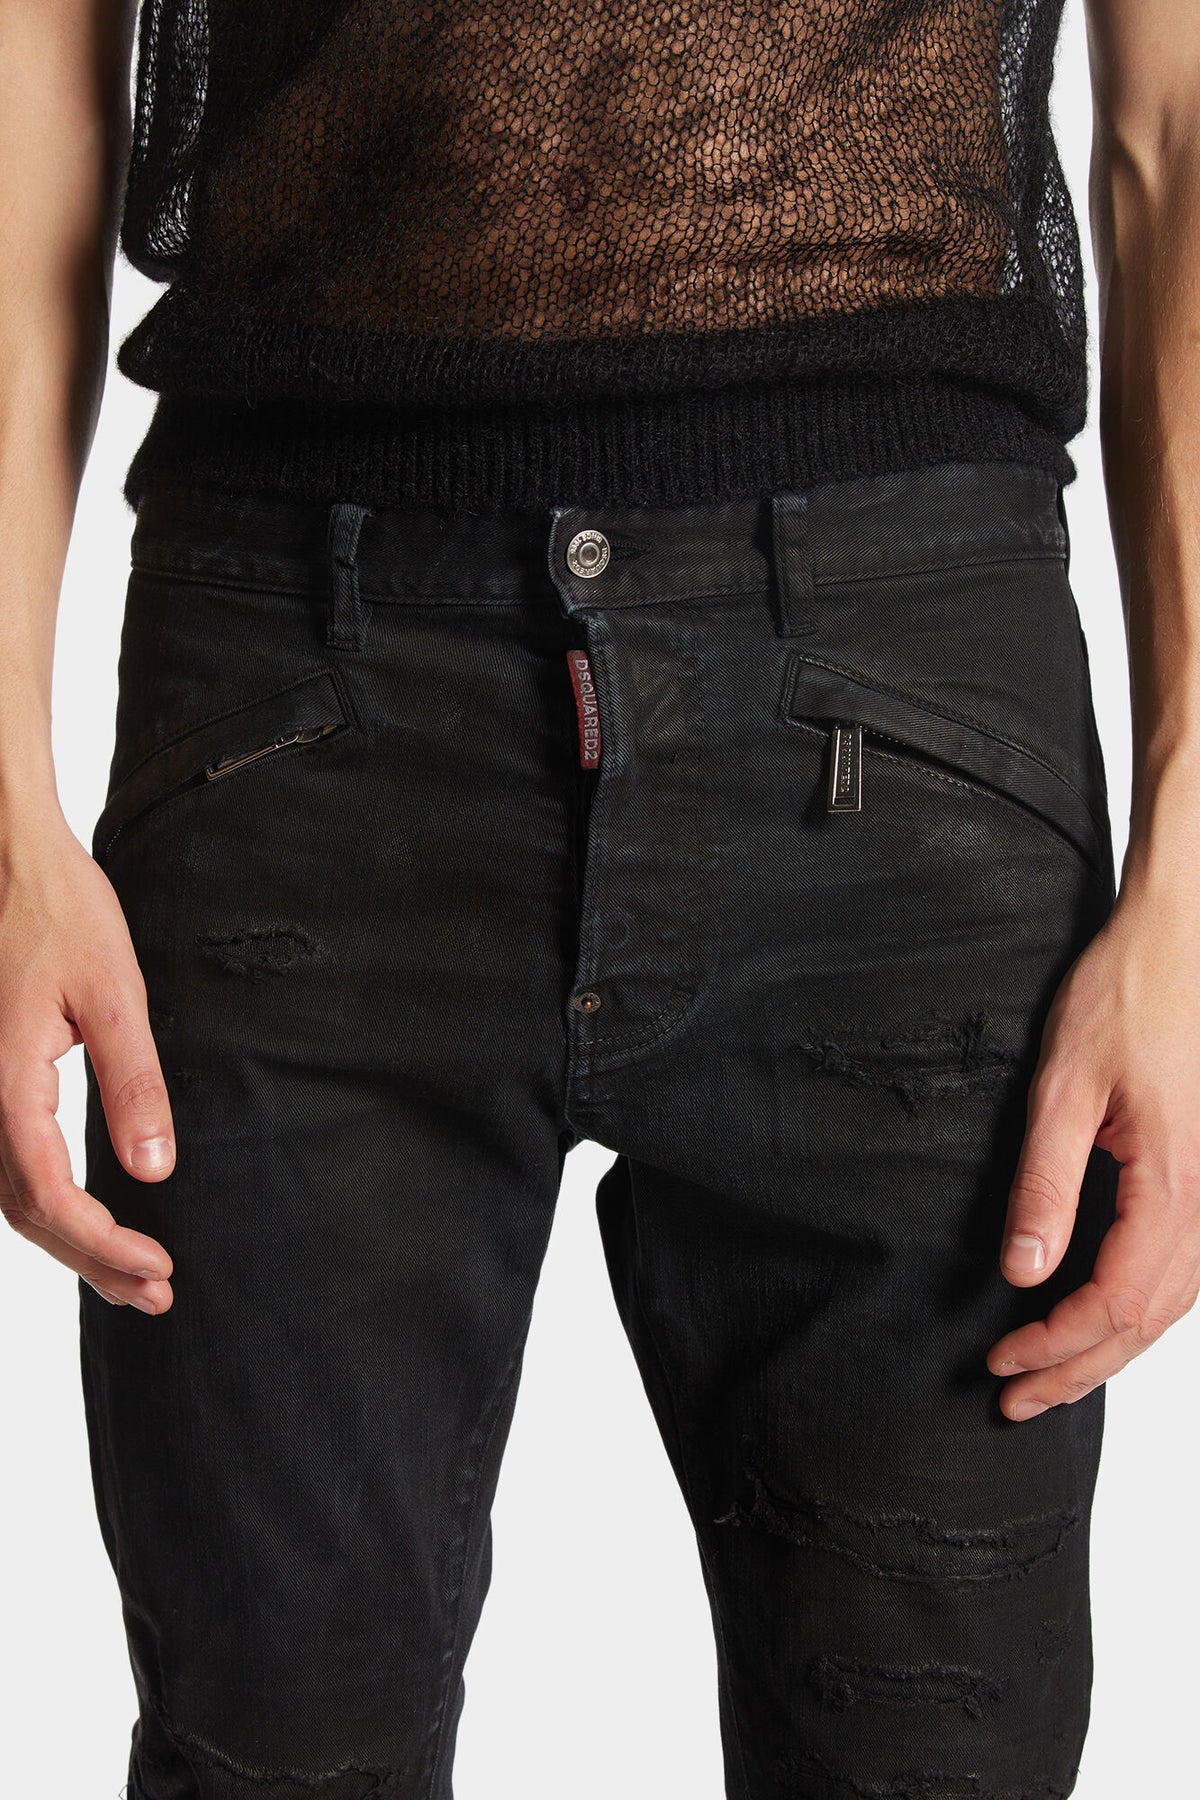 BLACK BULL RIPPED WASH COOL GUY JEANS